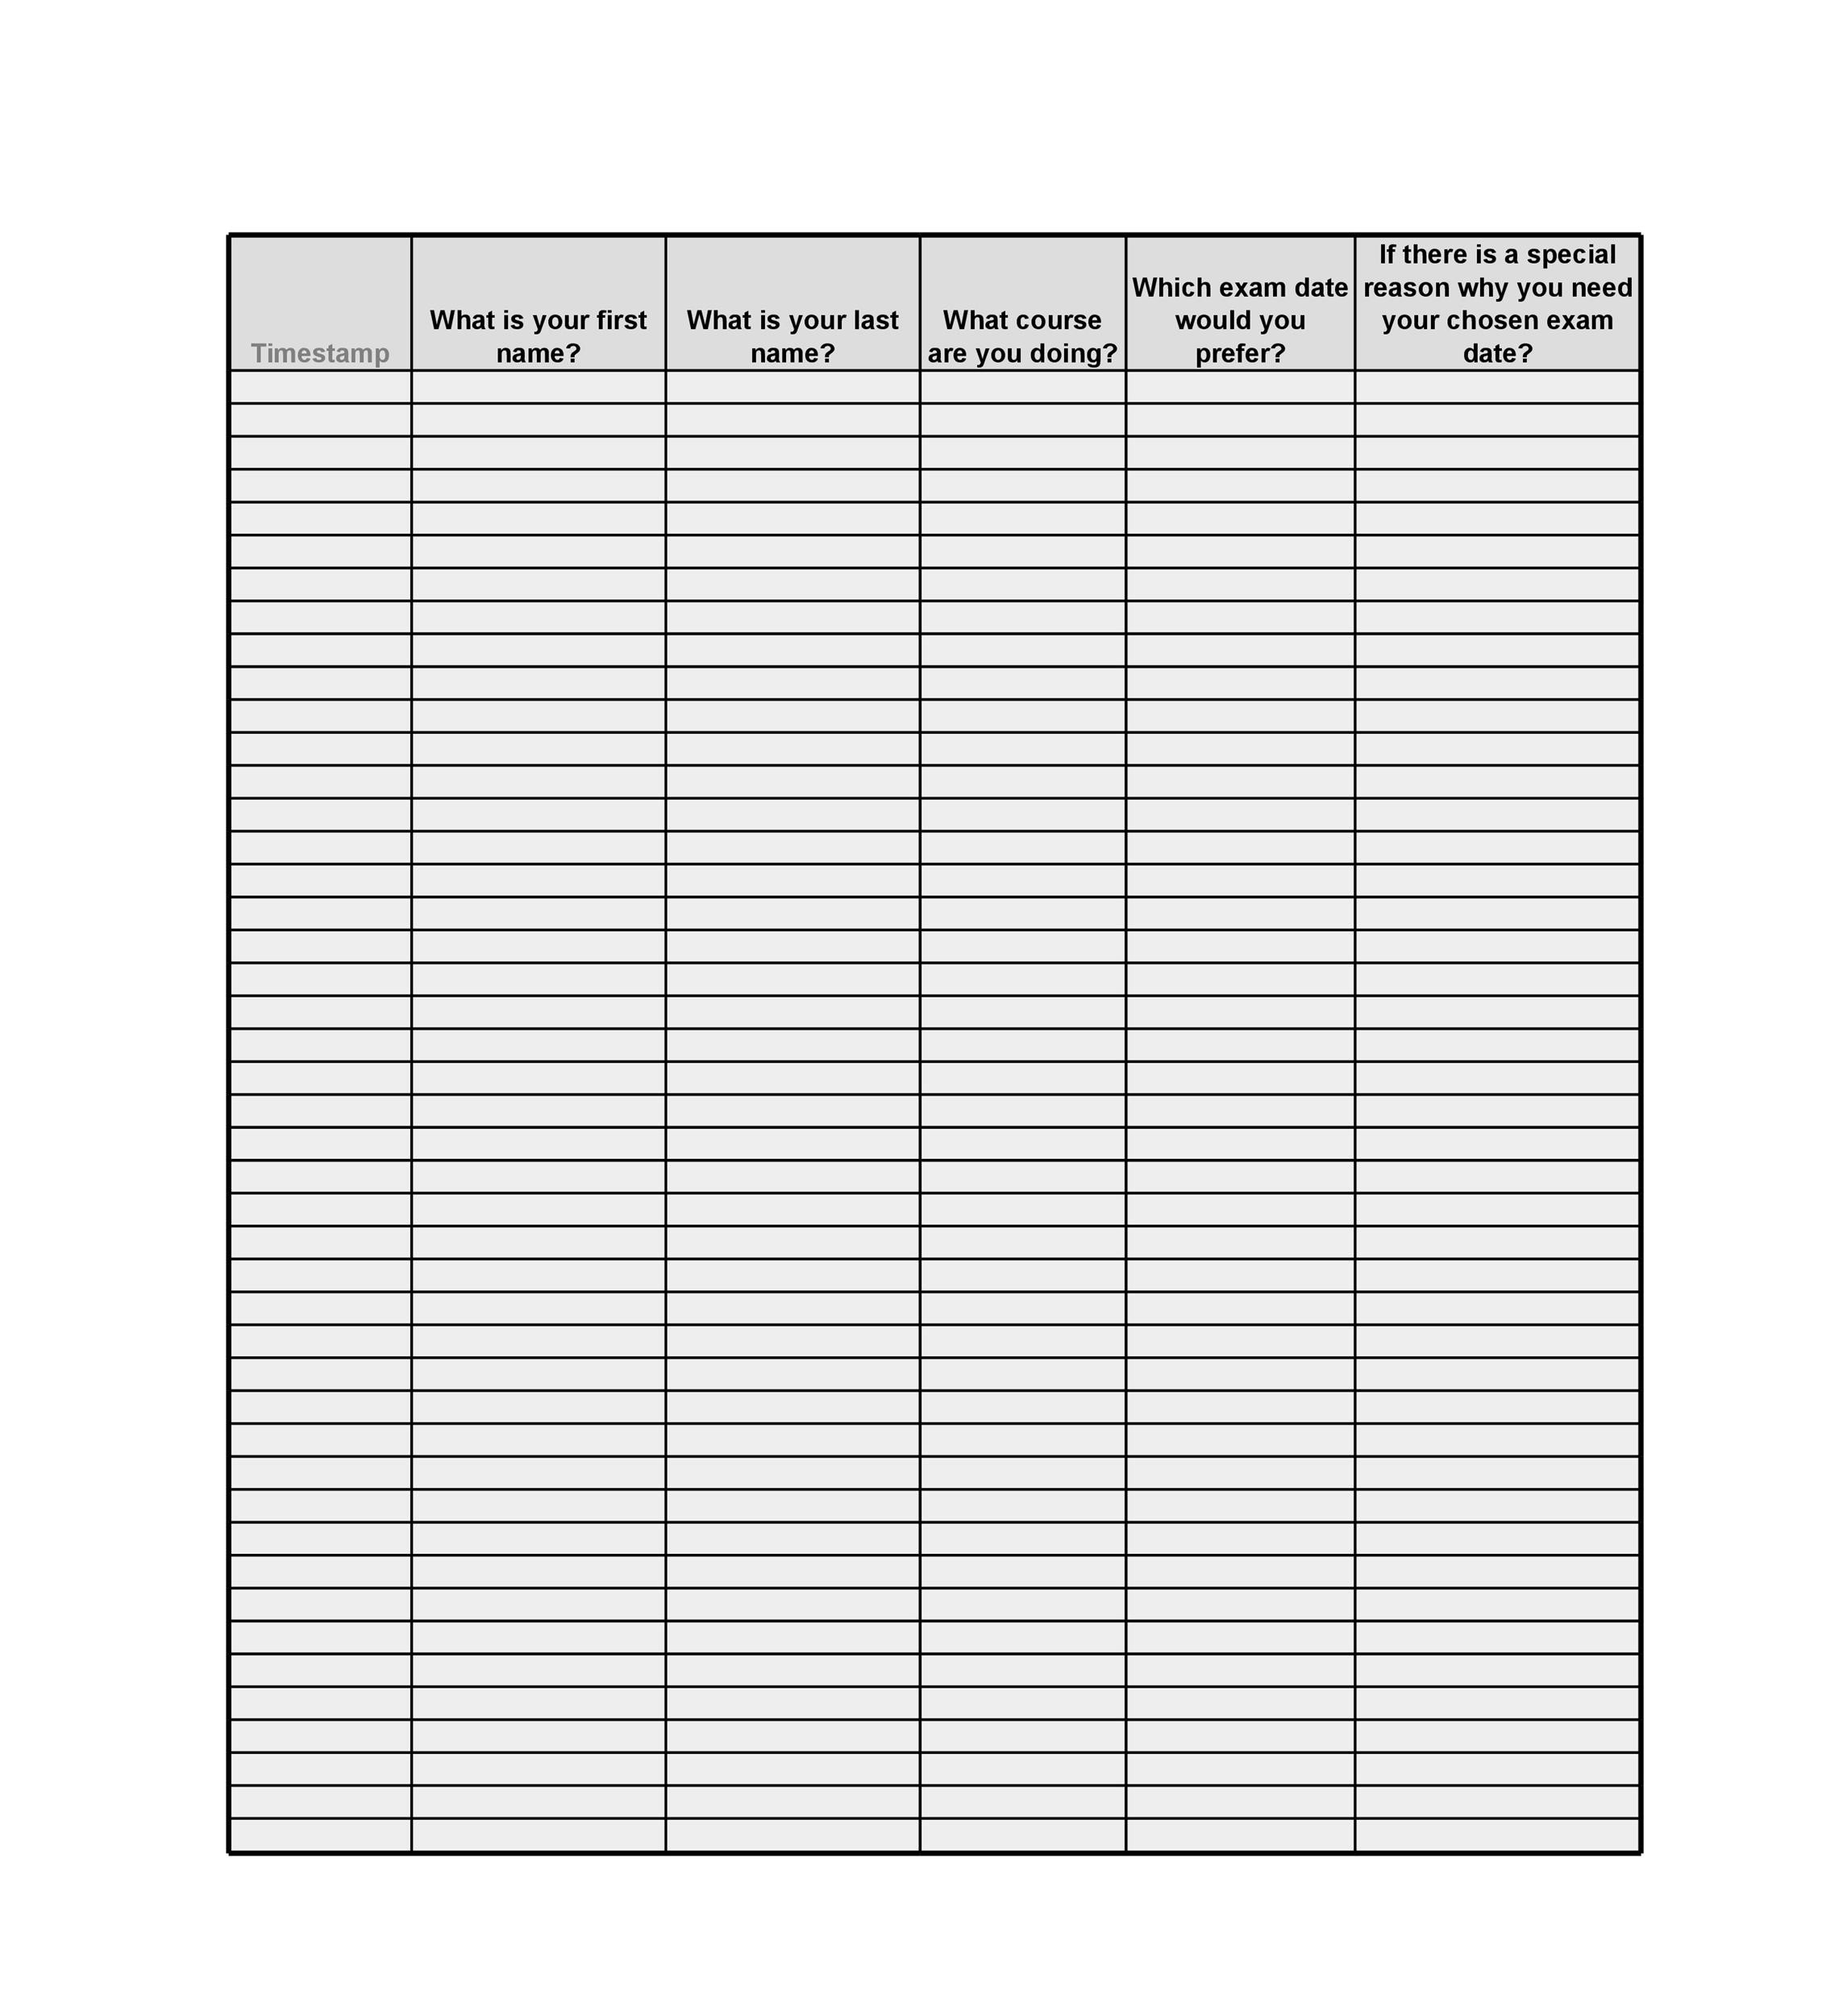 40 Sign Up Sheet / Sign In Sheet Templates (Word & Excel) Throughout Free Sign Up Sheet Template Word